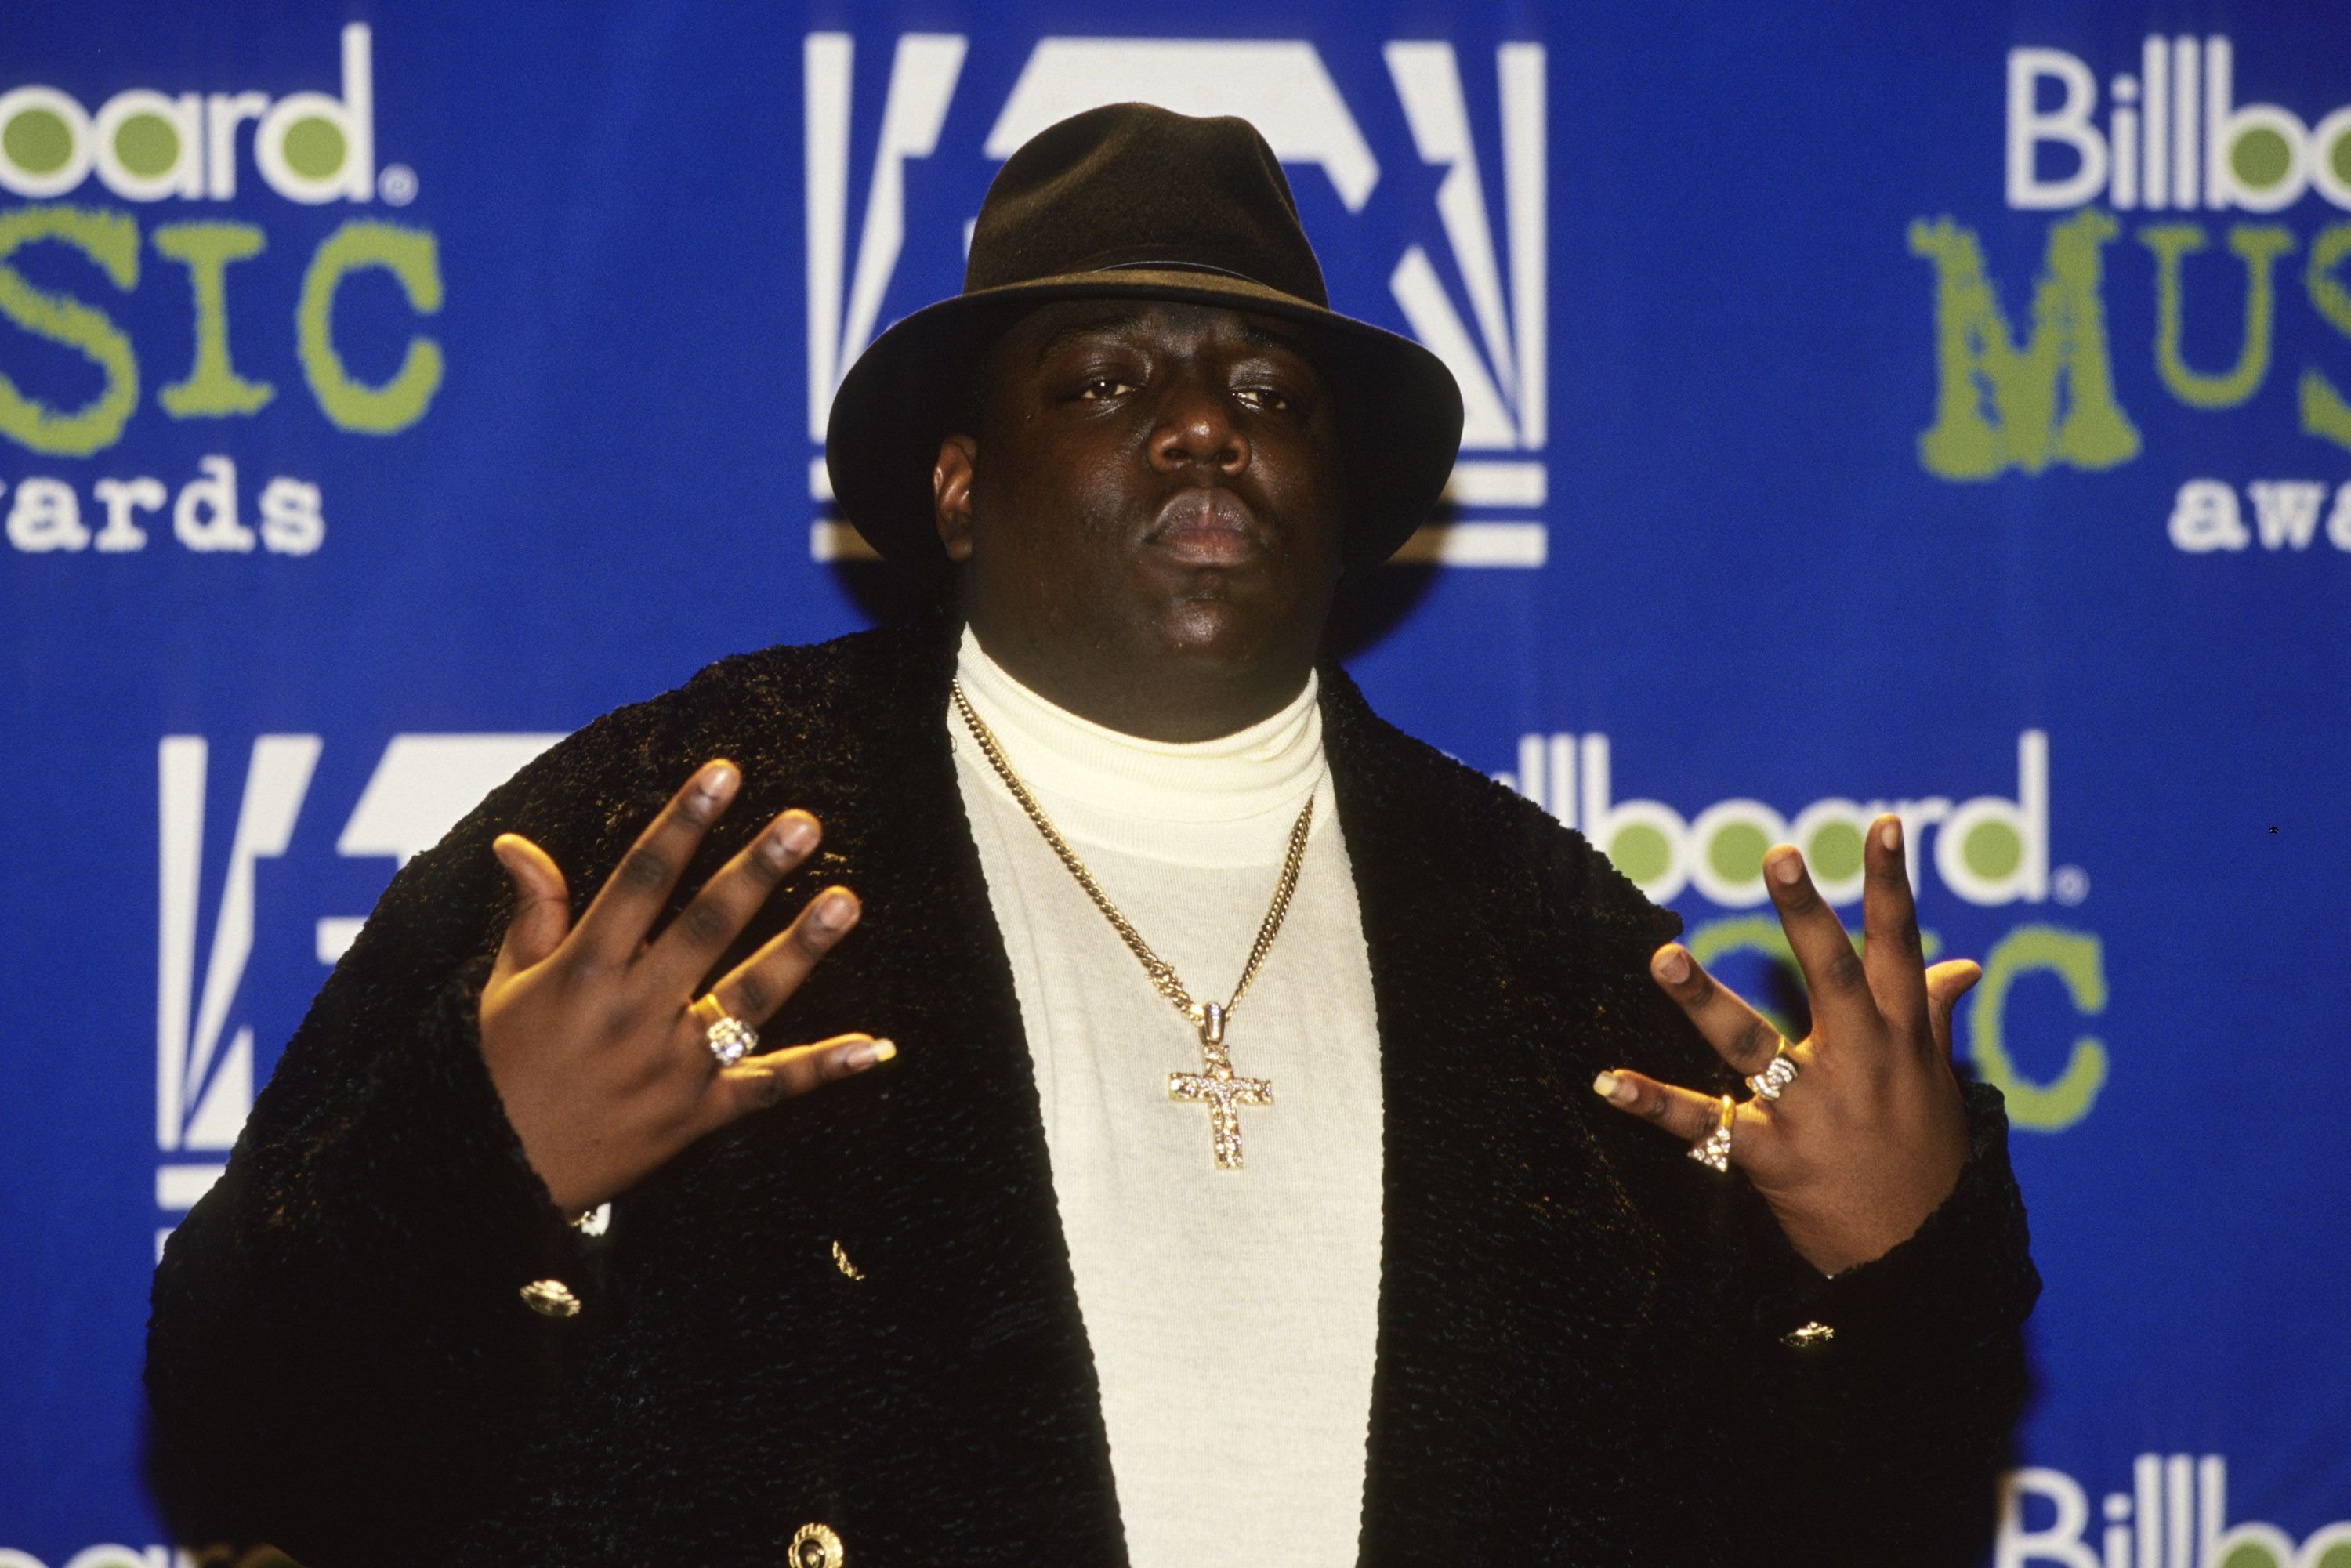 American rapper Notorious B.I.G. at the 1995 Billboard Music Awards in New York on December 6, 1996 | Photo: Getty Images